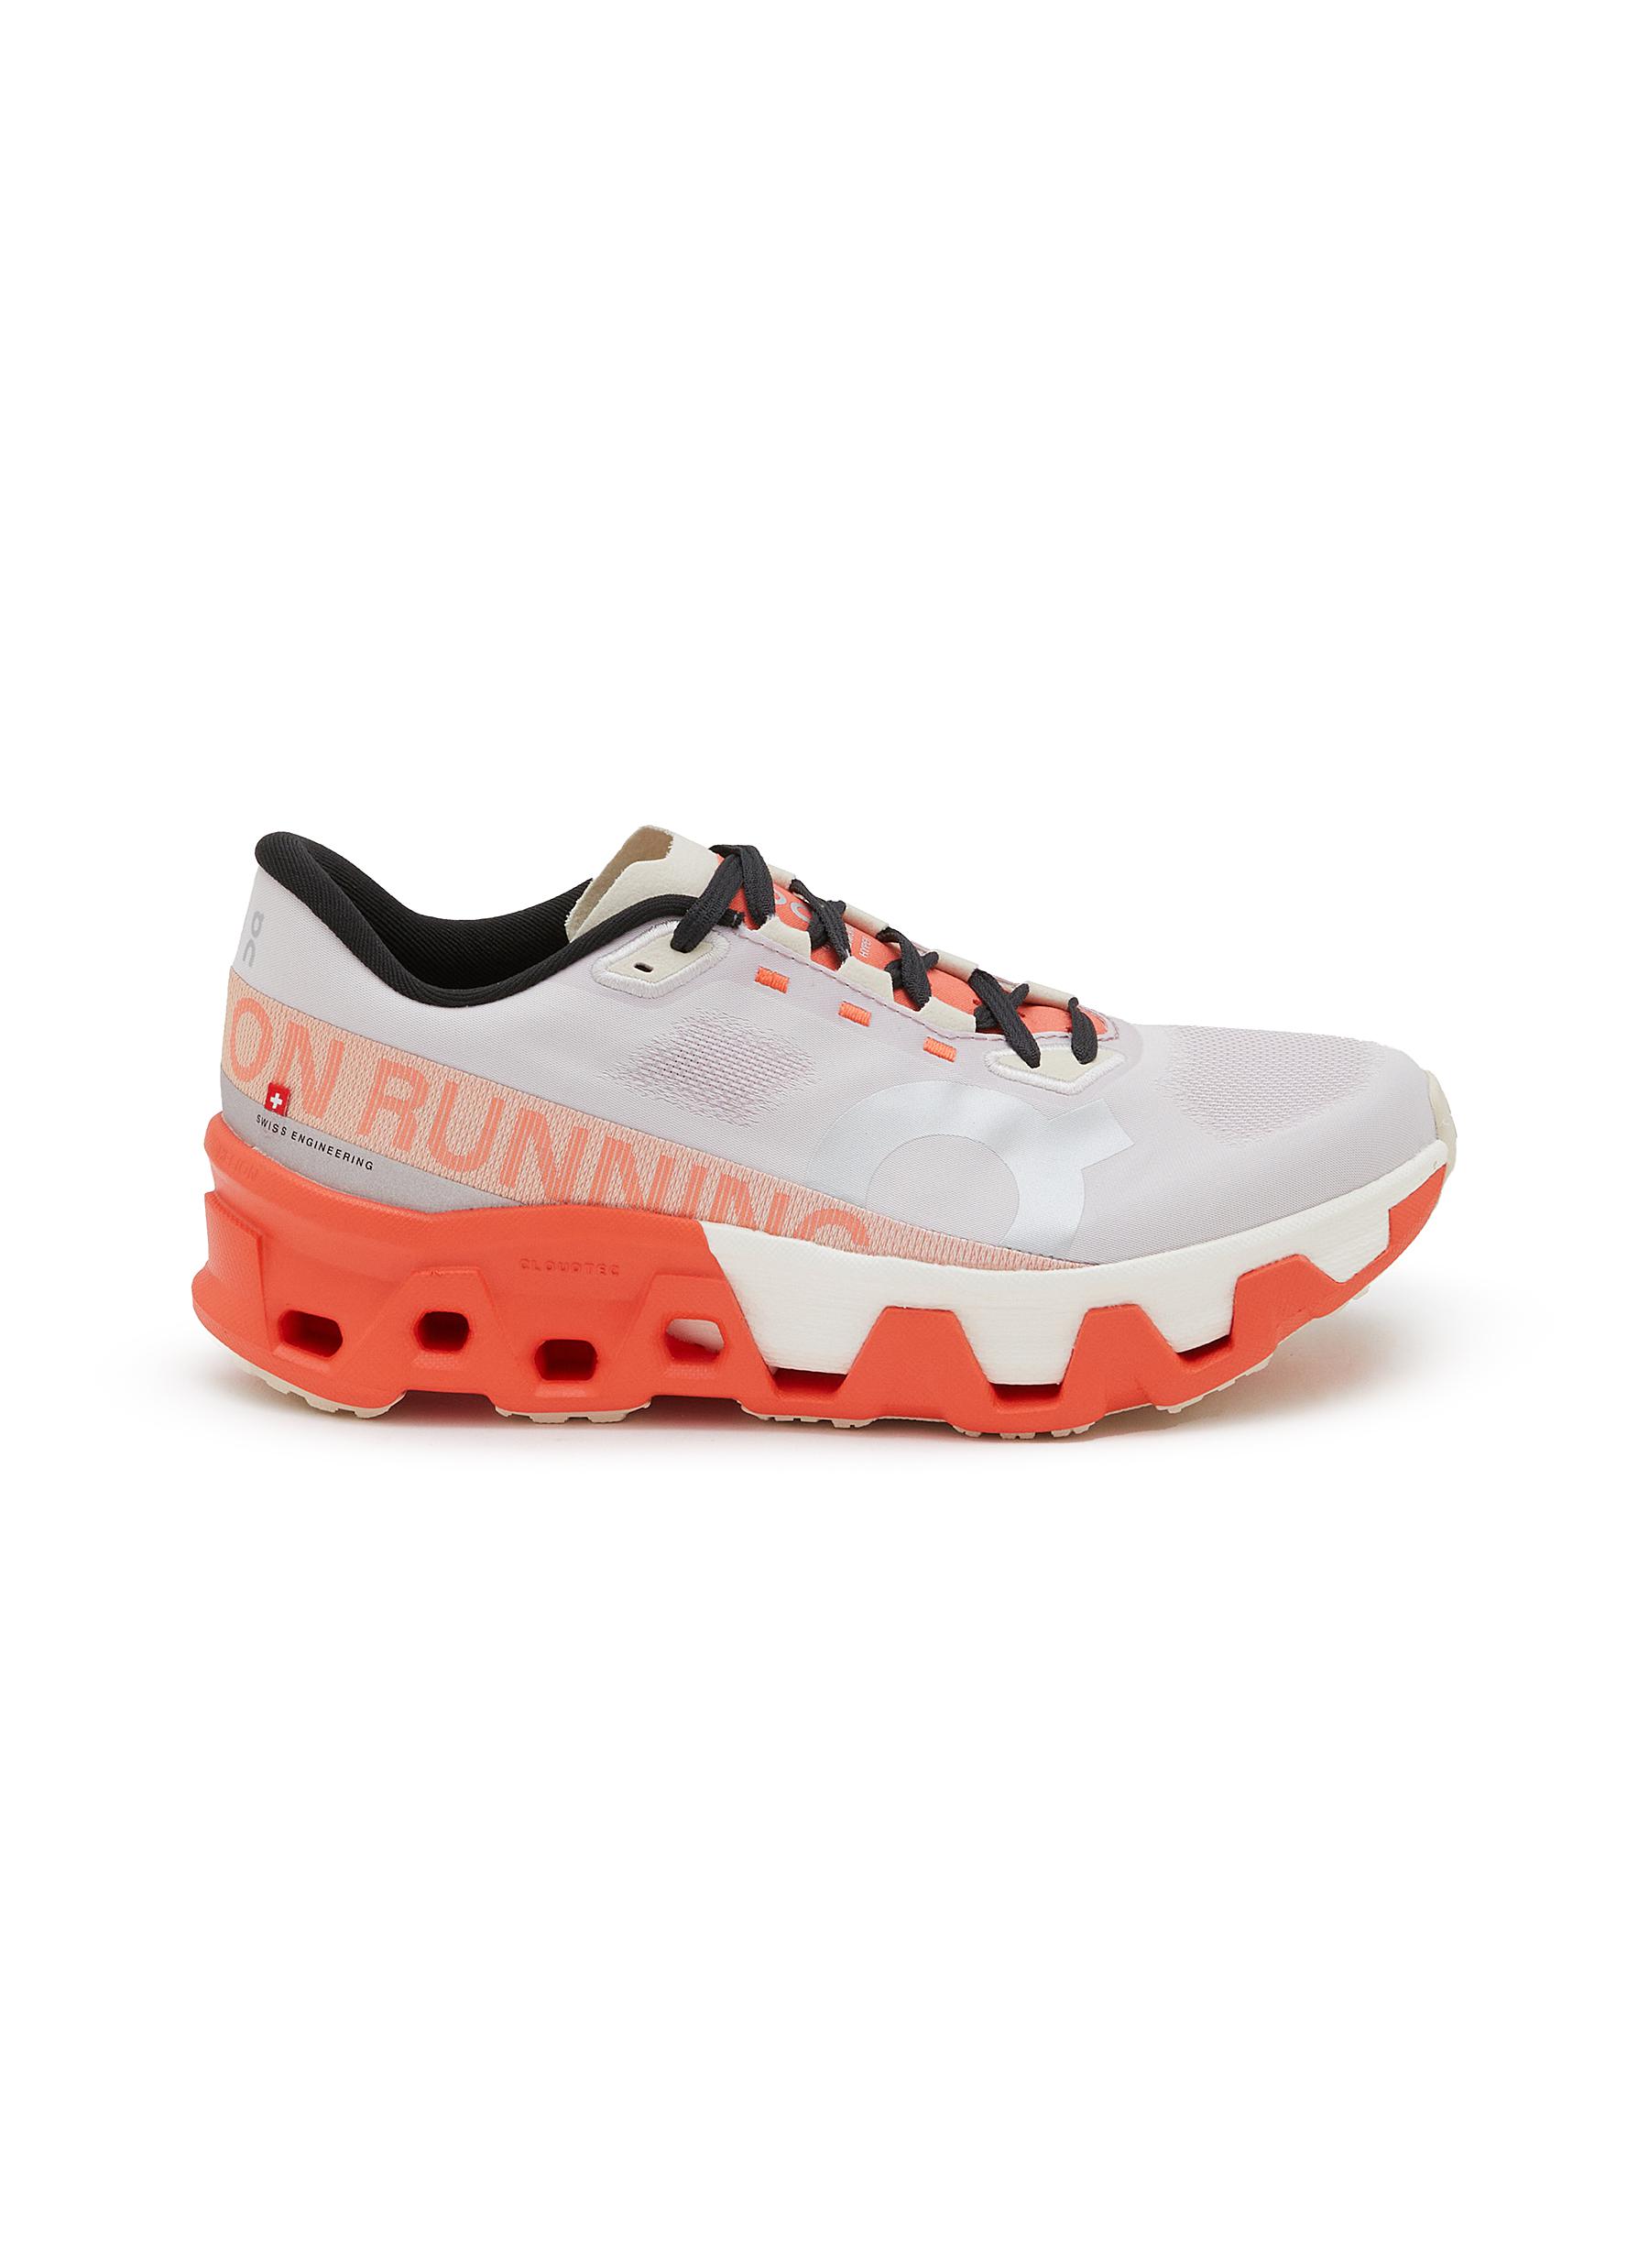 ON | Cloudmonster Hyper Low Top Lace Up Runner Shoes | Women 